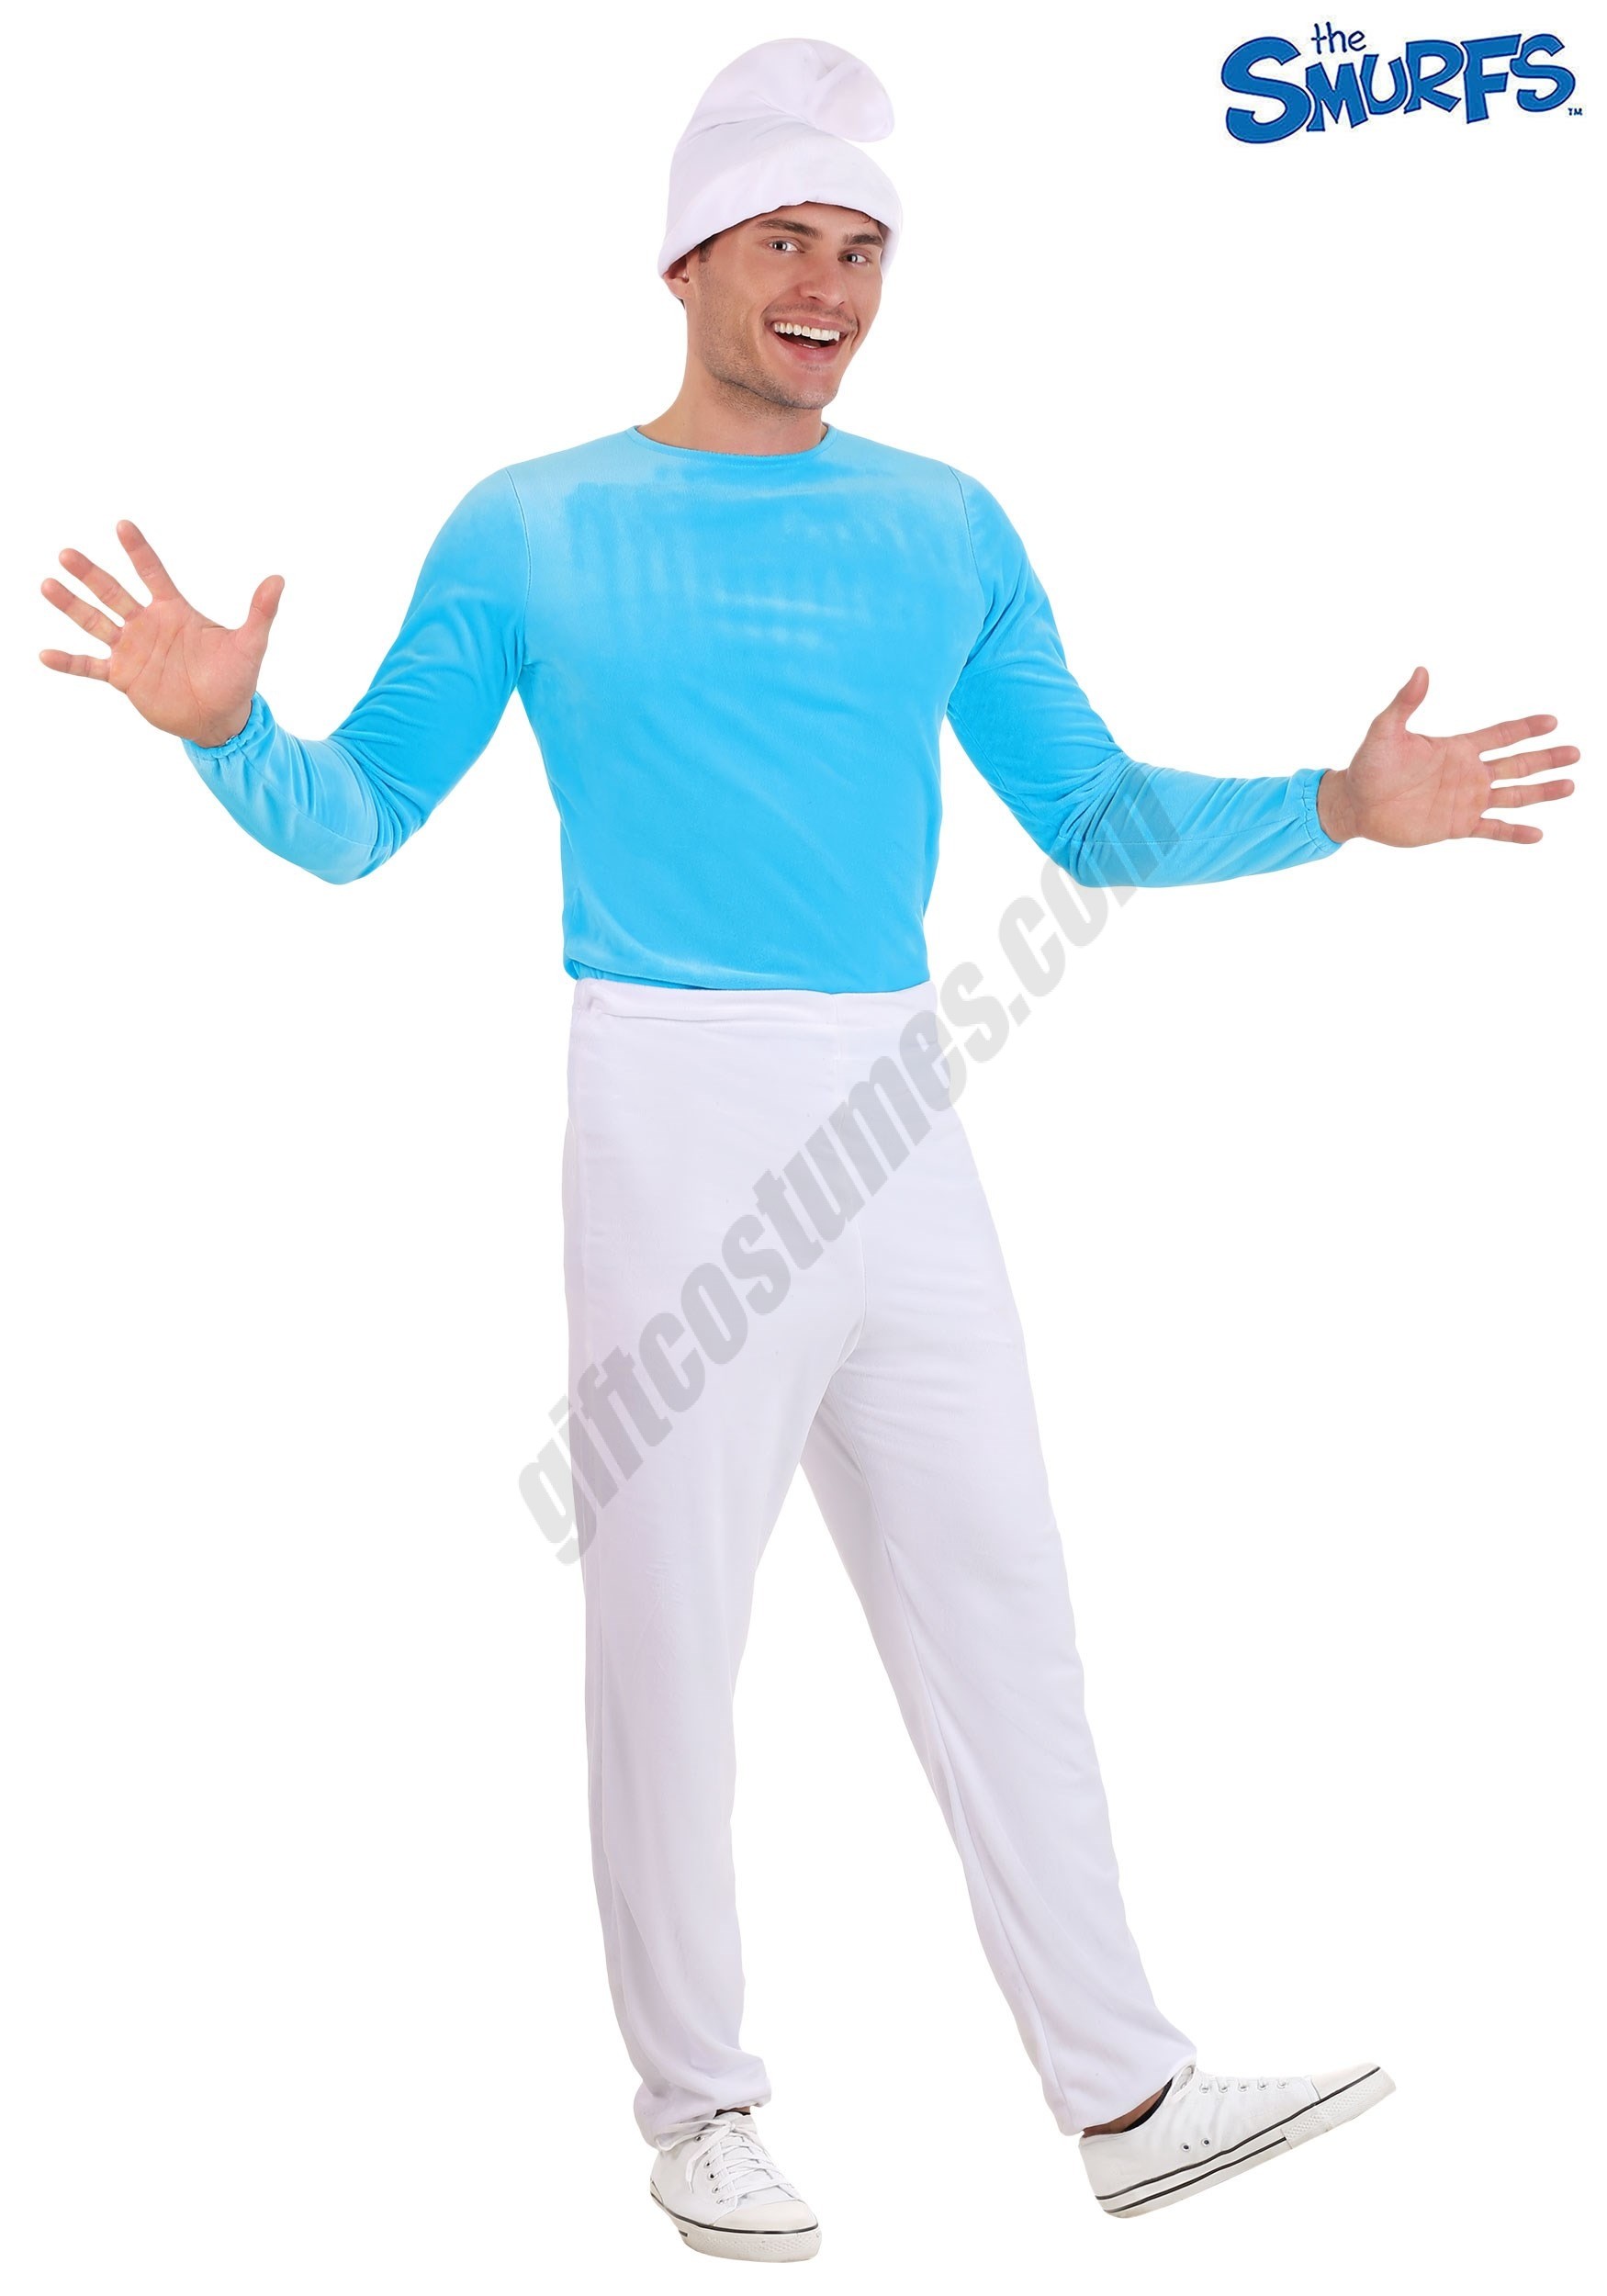  The Smurfs Plus Size Smurf Costume for men Promotions -  The Smurfs Plus Size Smurf Costume for men Promotions